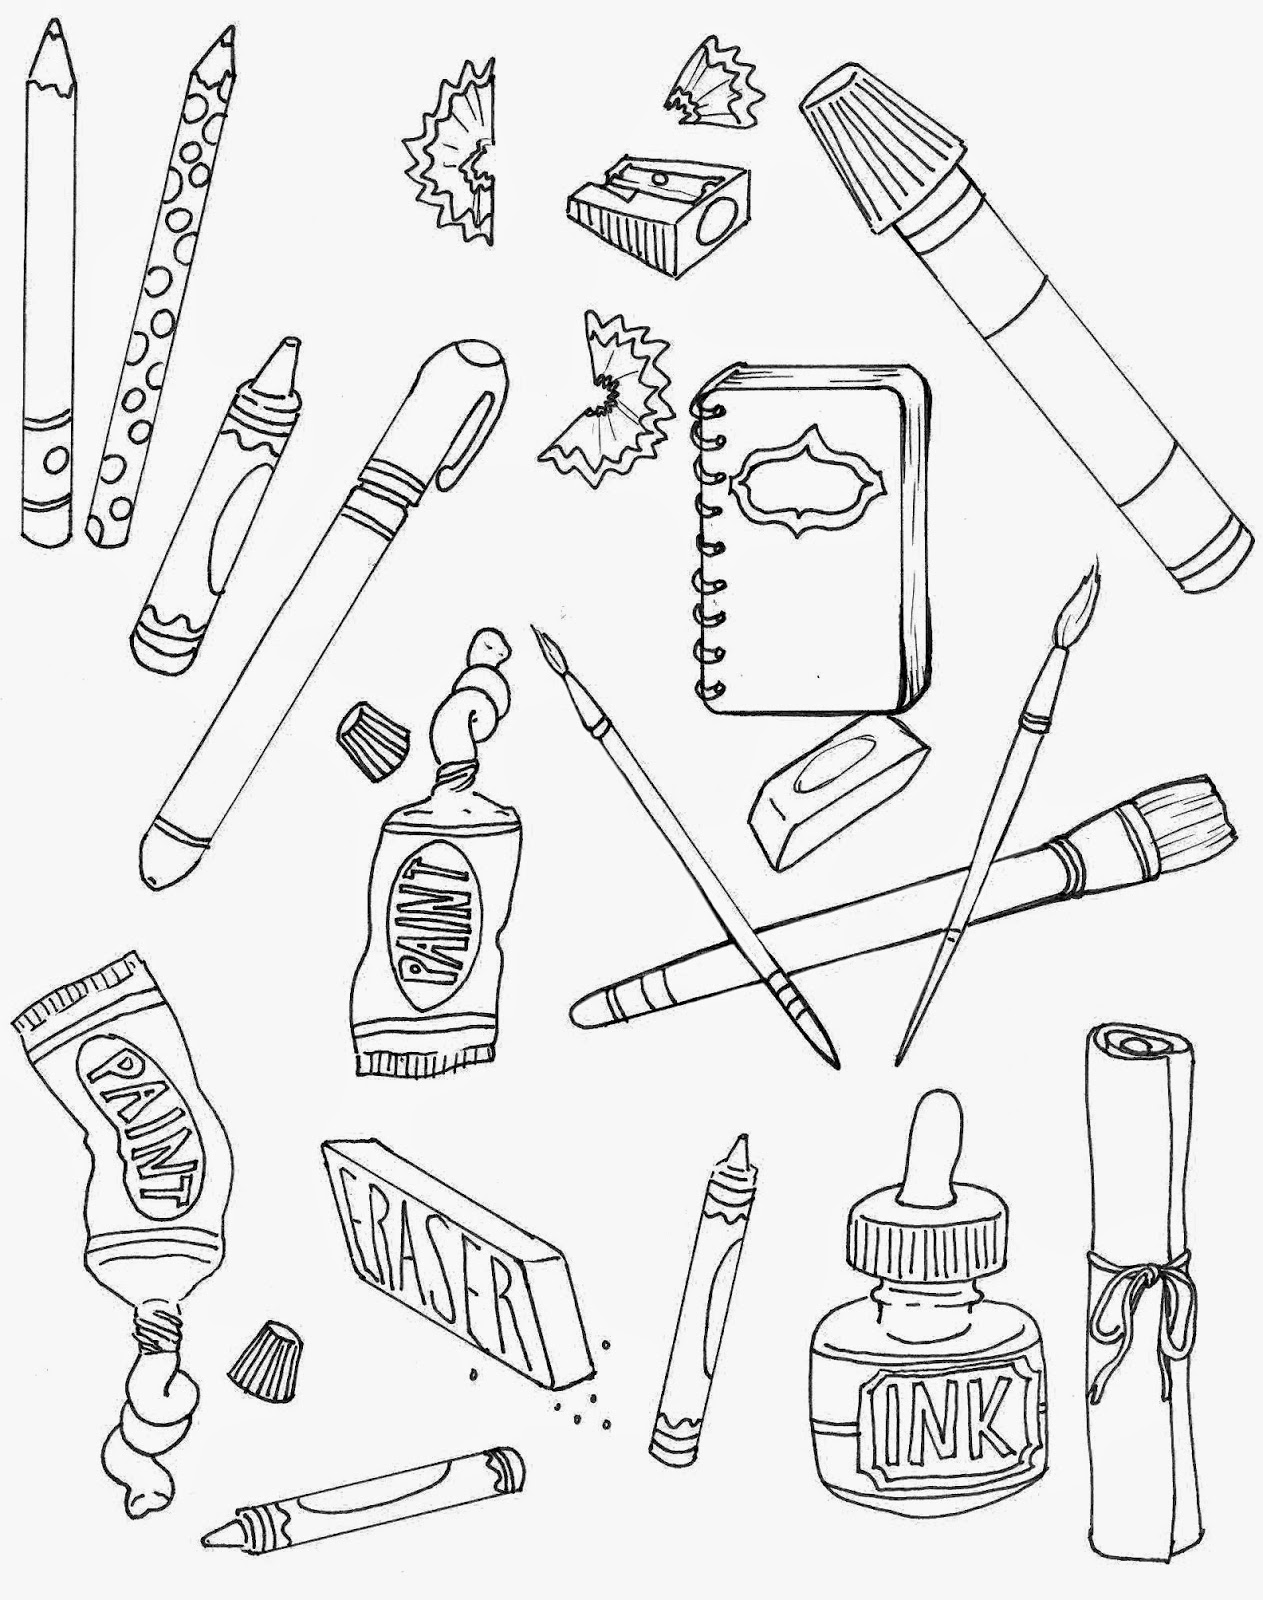 Sunday Fun Art Supplies Coloring Page